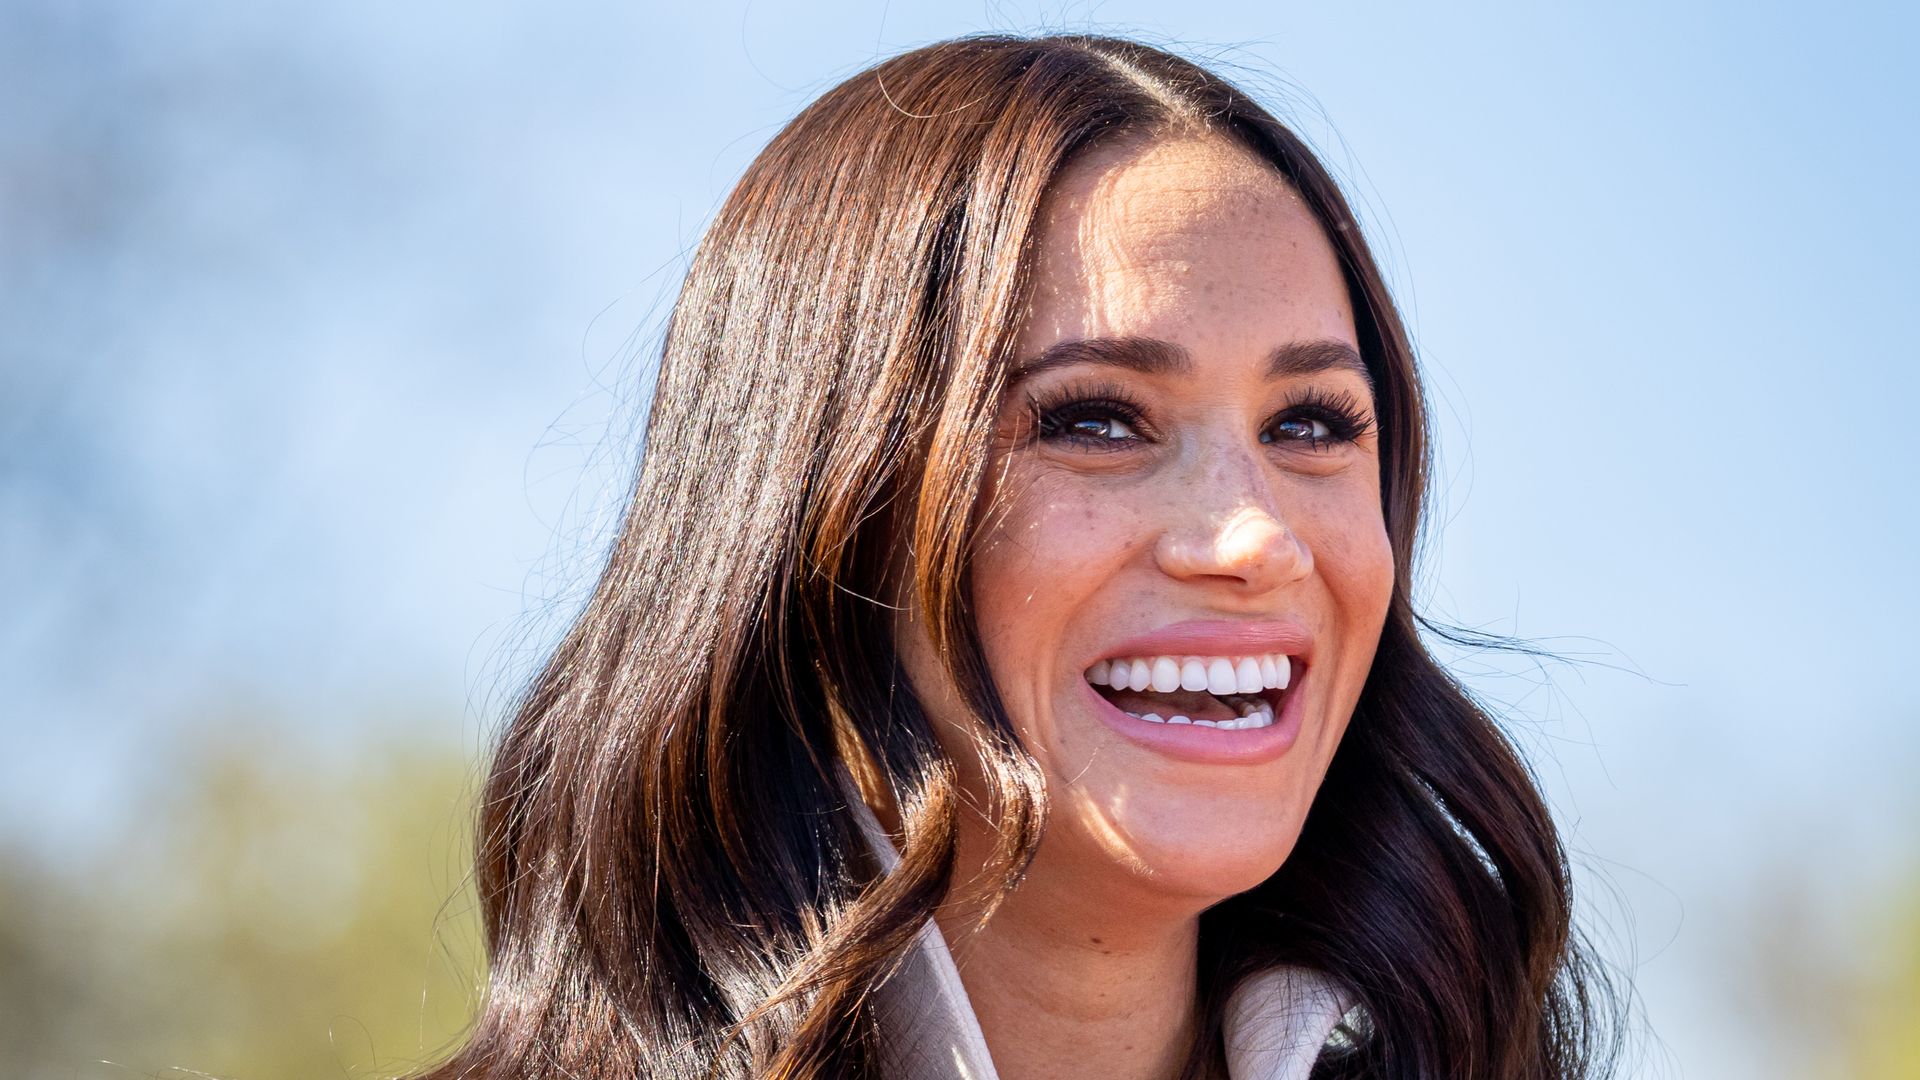 Meghan, Duchess of Sussex smiling in white jacket